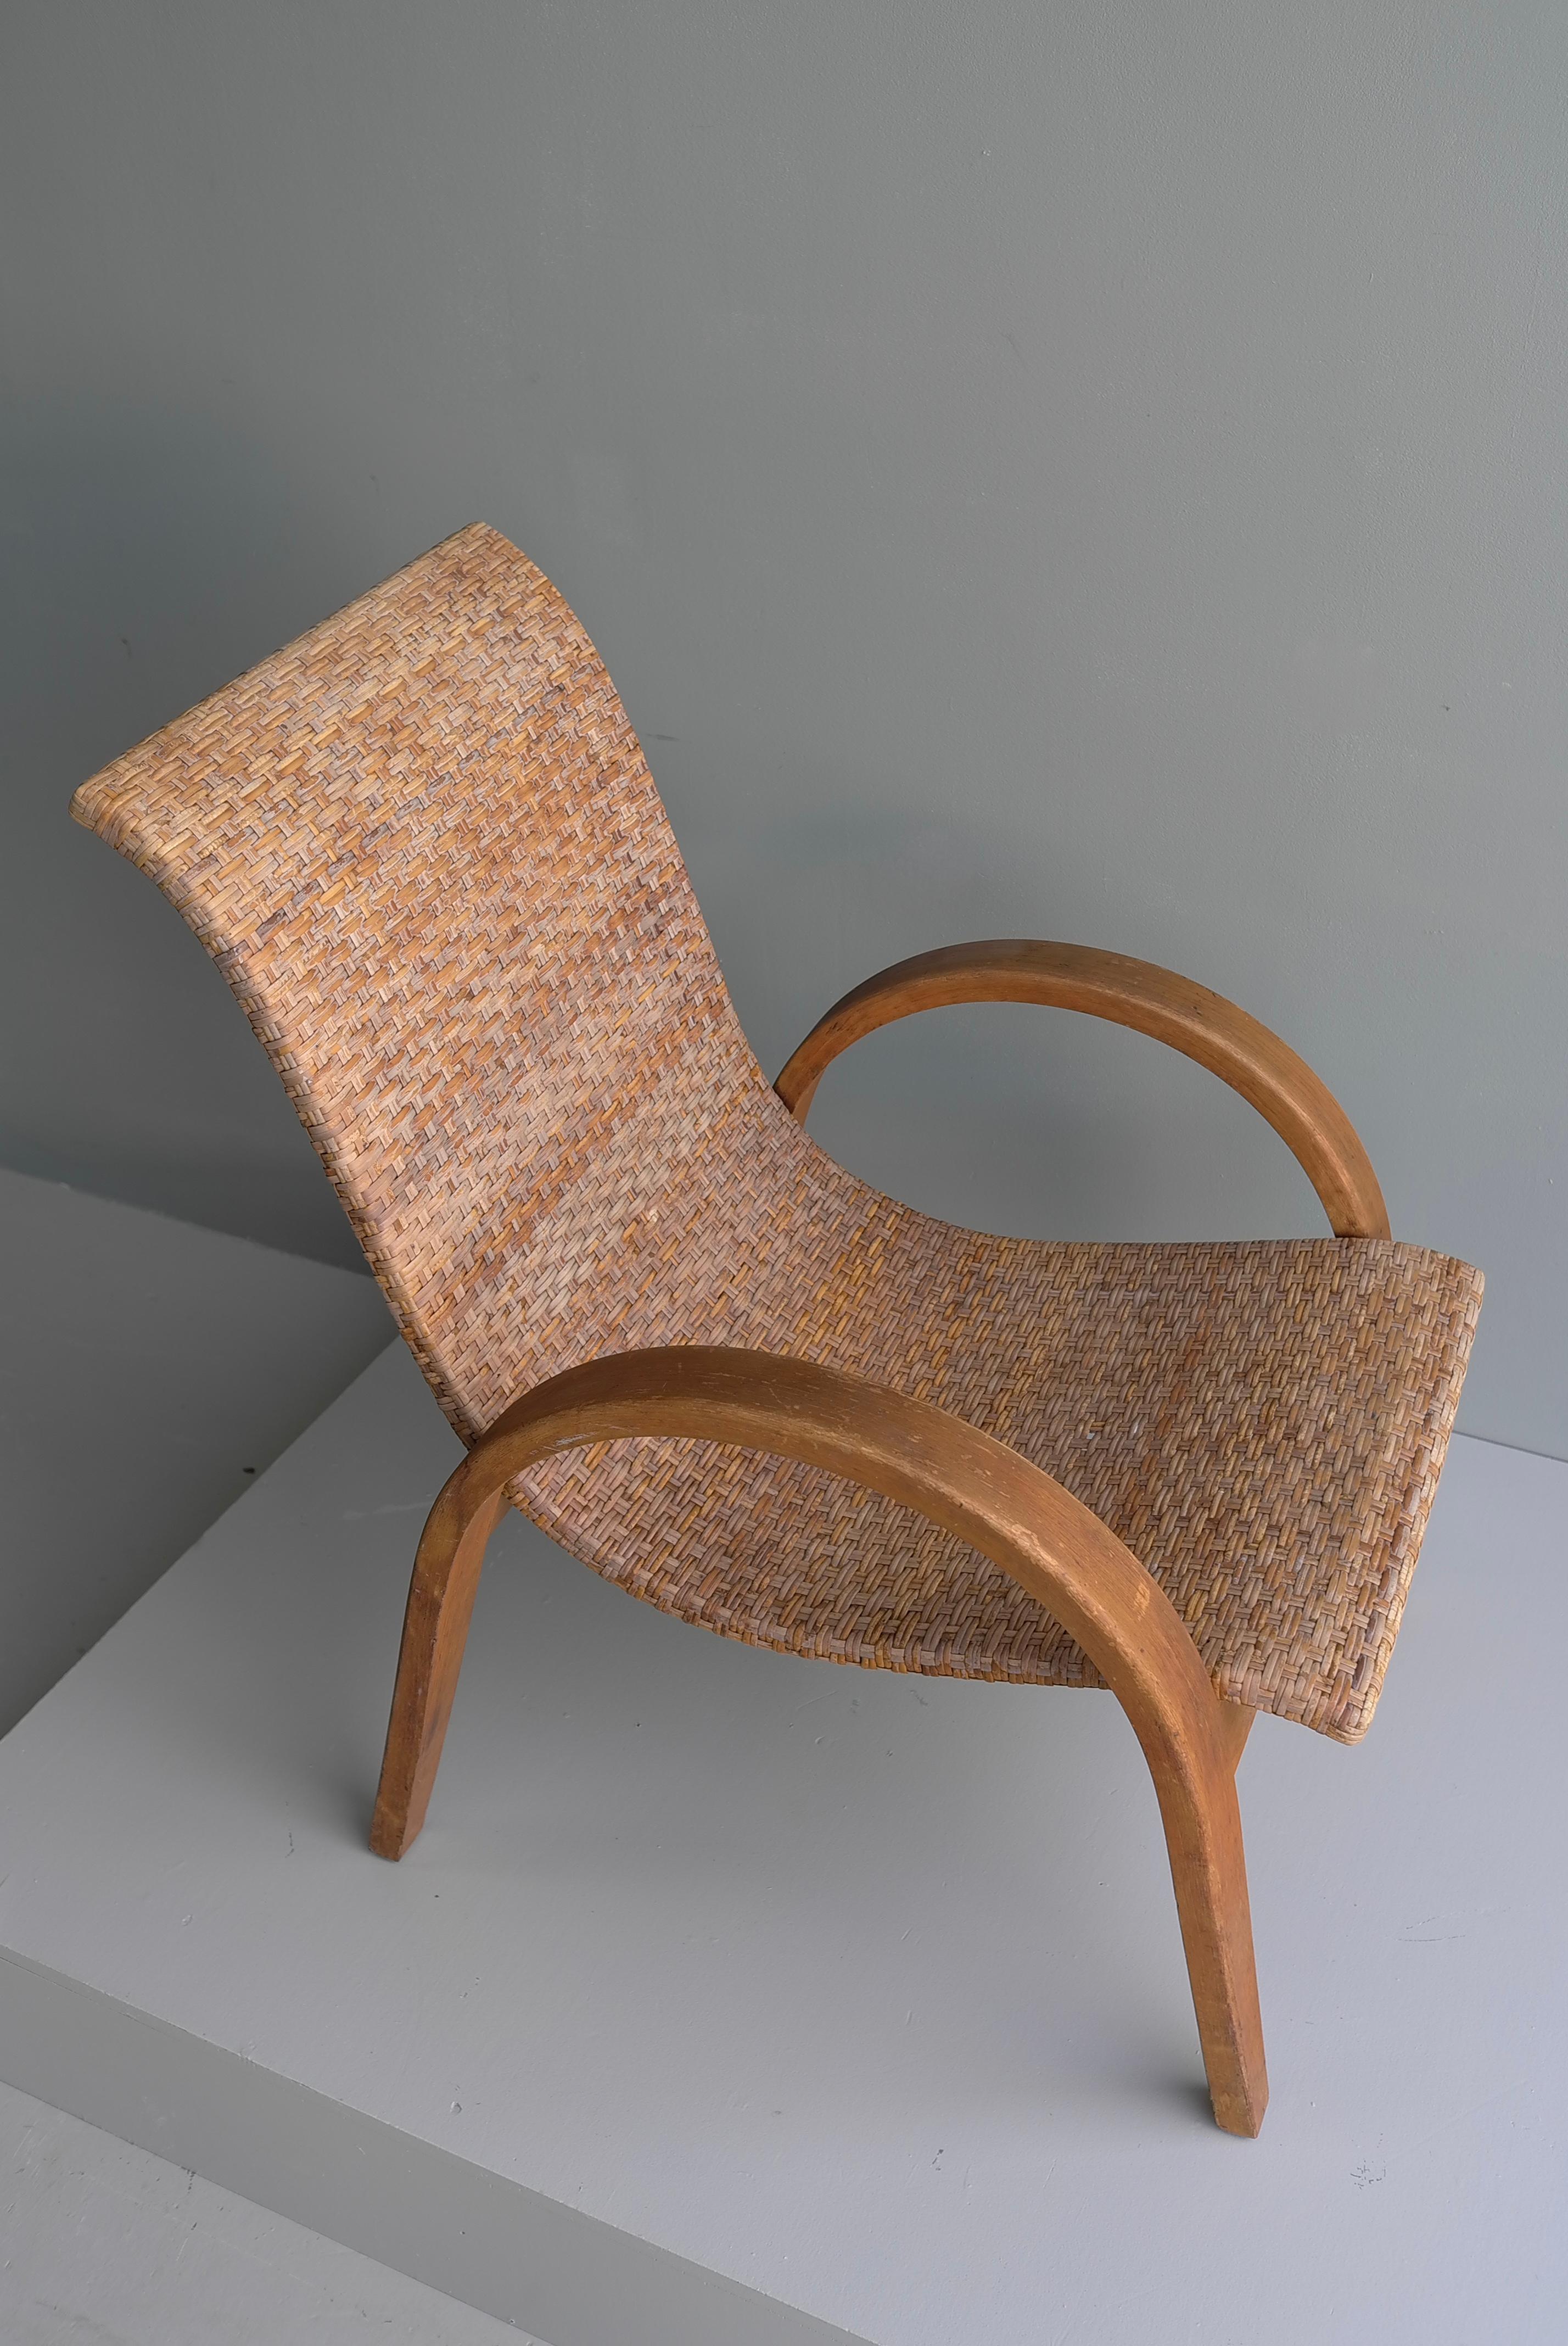 Sculptural Mid-Century Modern armchair in wood and cane, 1950's.